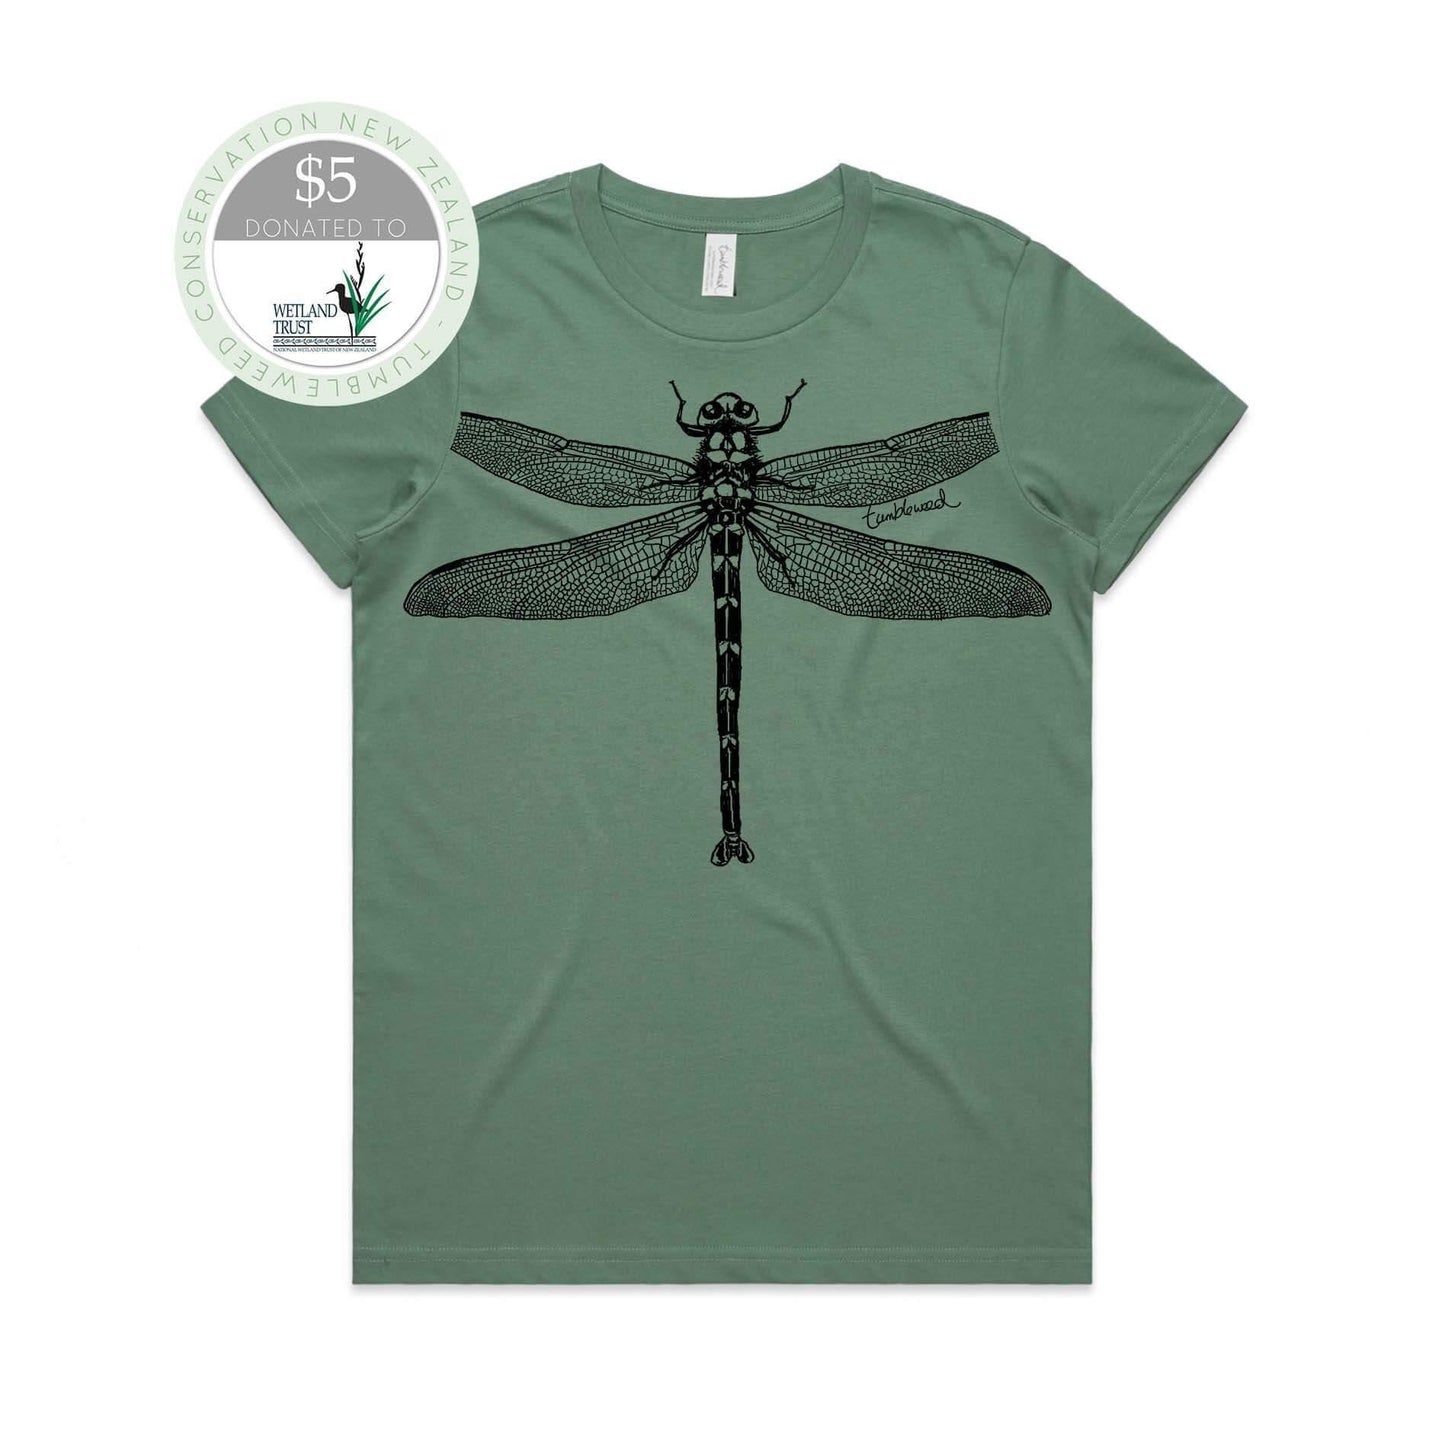 Sage, female t-shirt featuring a screen printed nz dragonfly design.